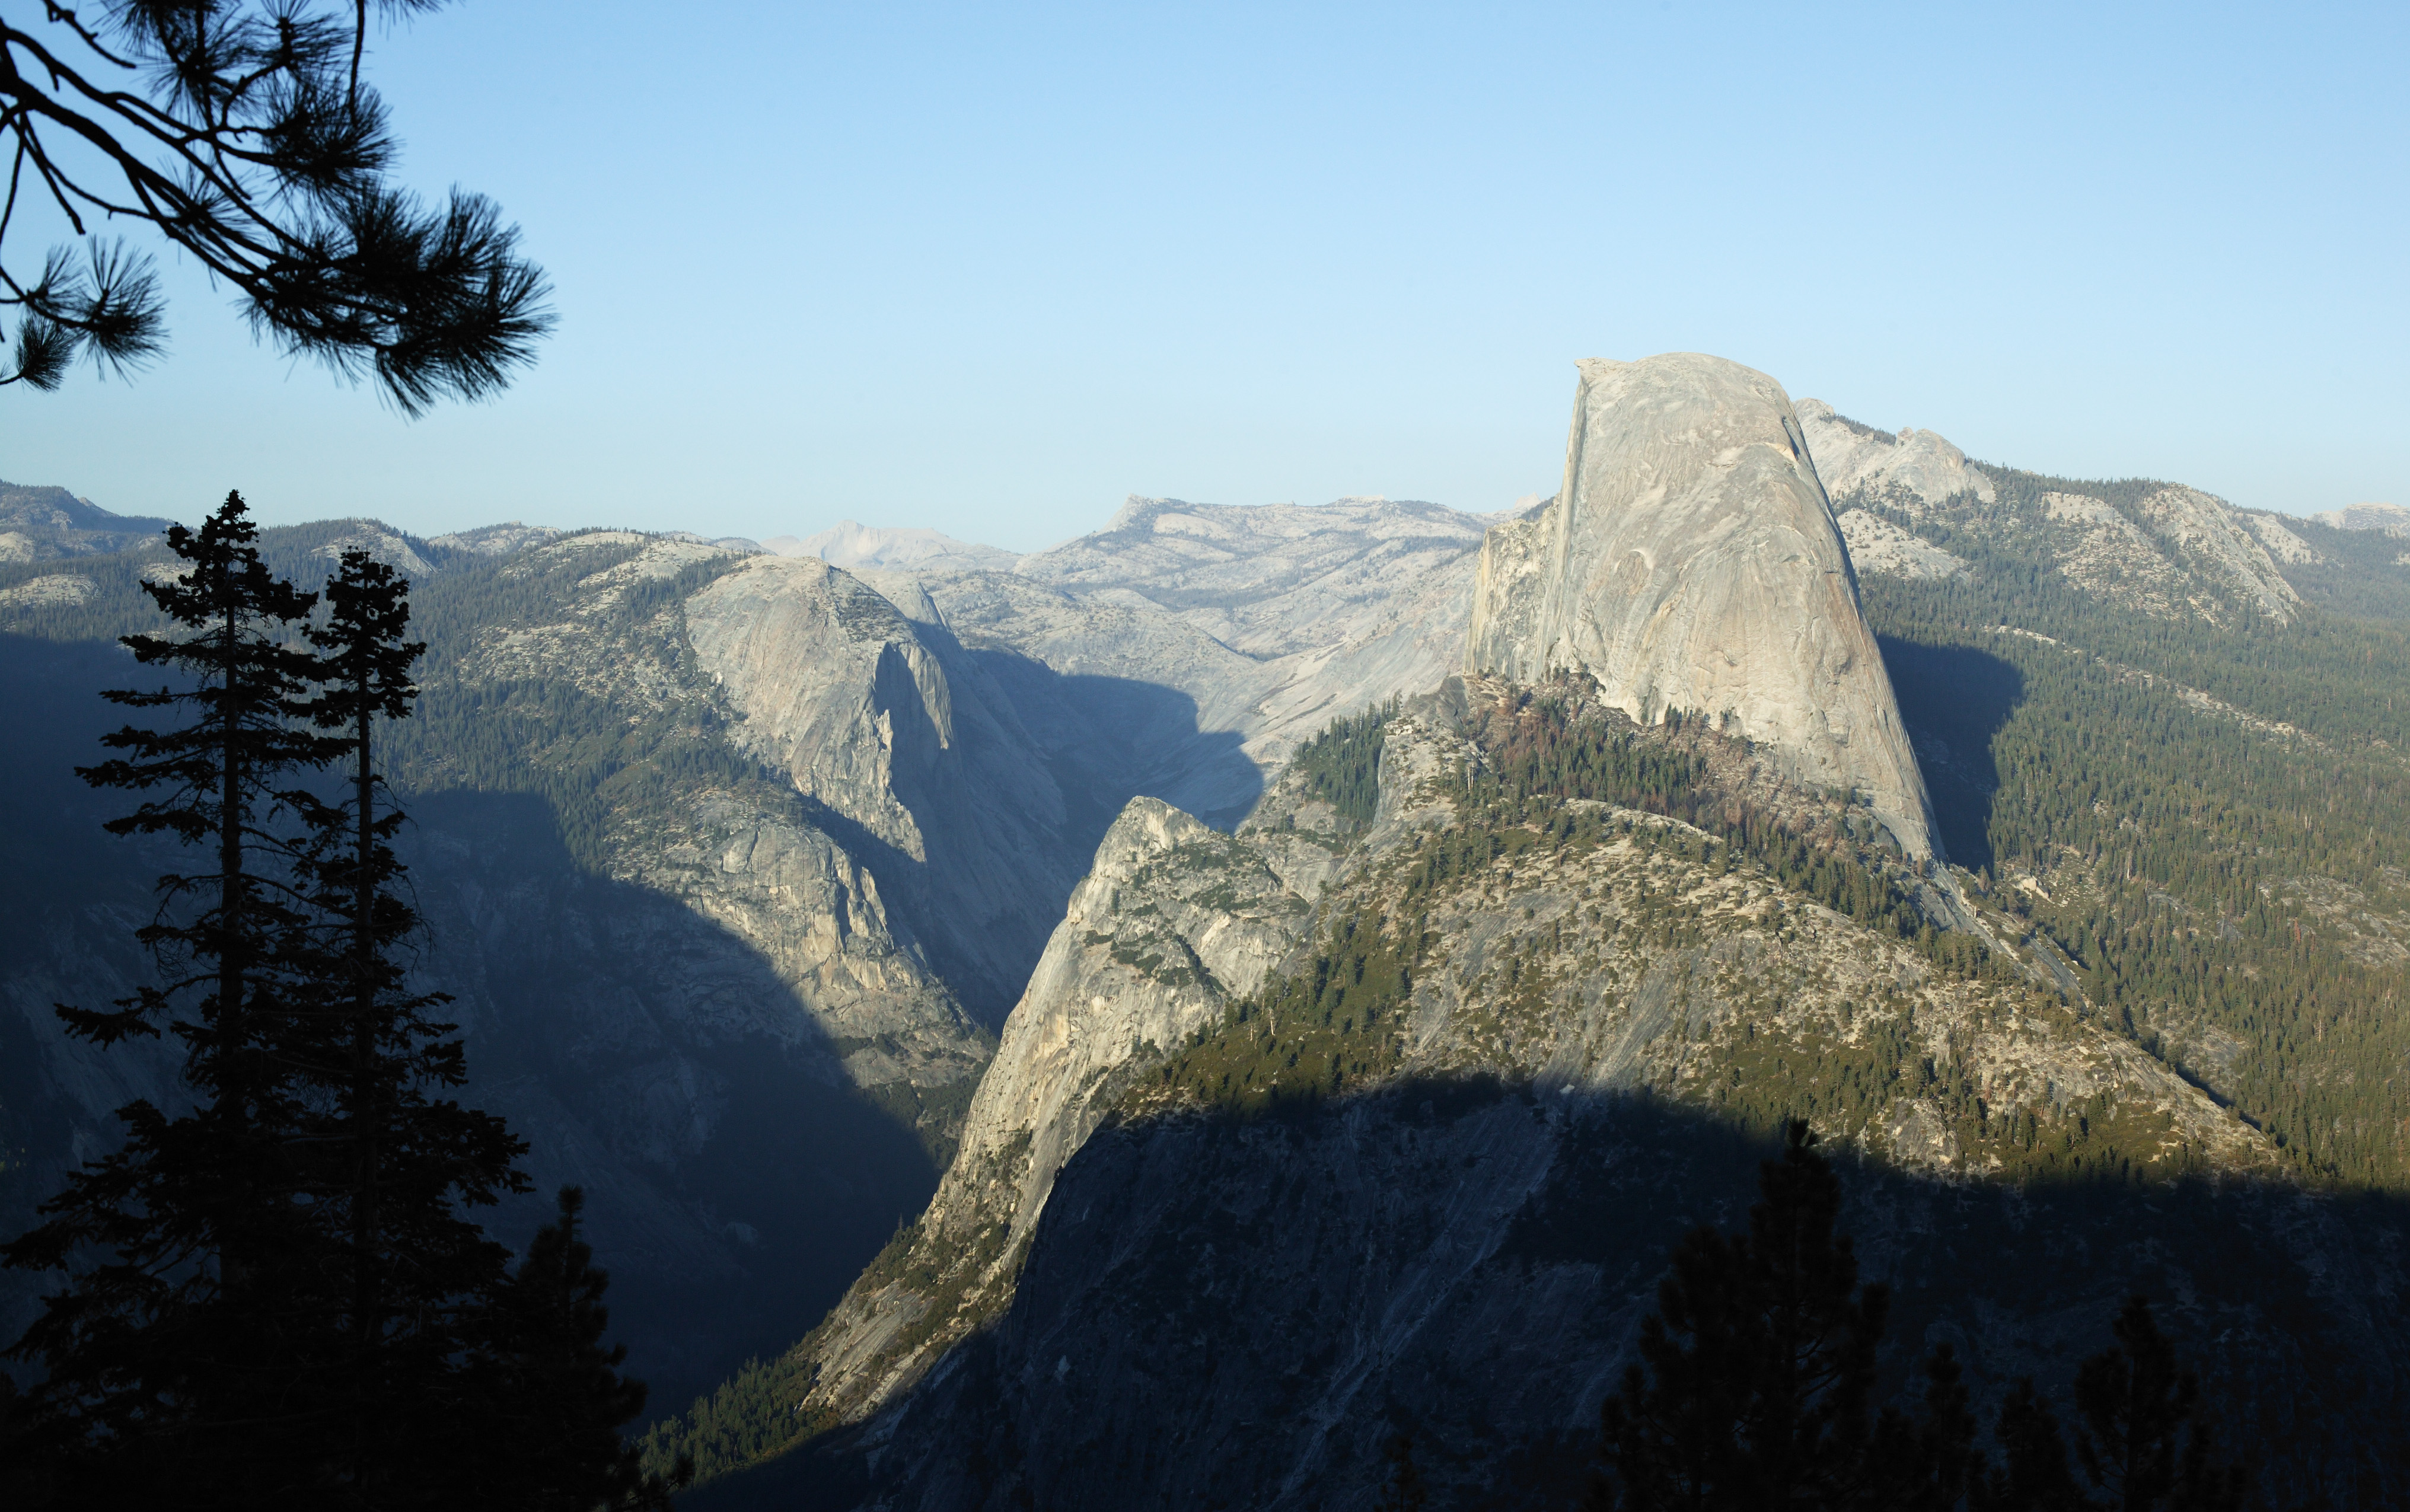 photo,material,free,landscape,picture,stock photo,Creative Commons,Half Dome, tree, Granite, forest, stone